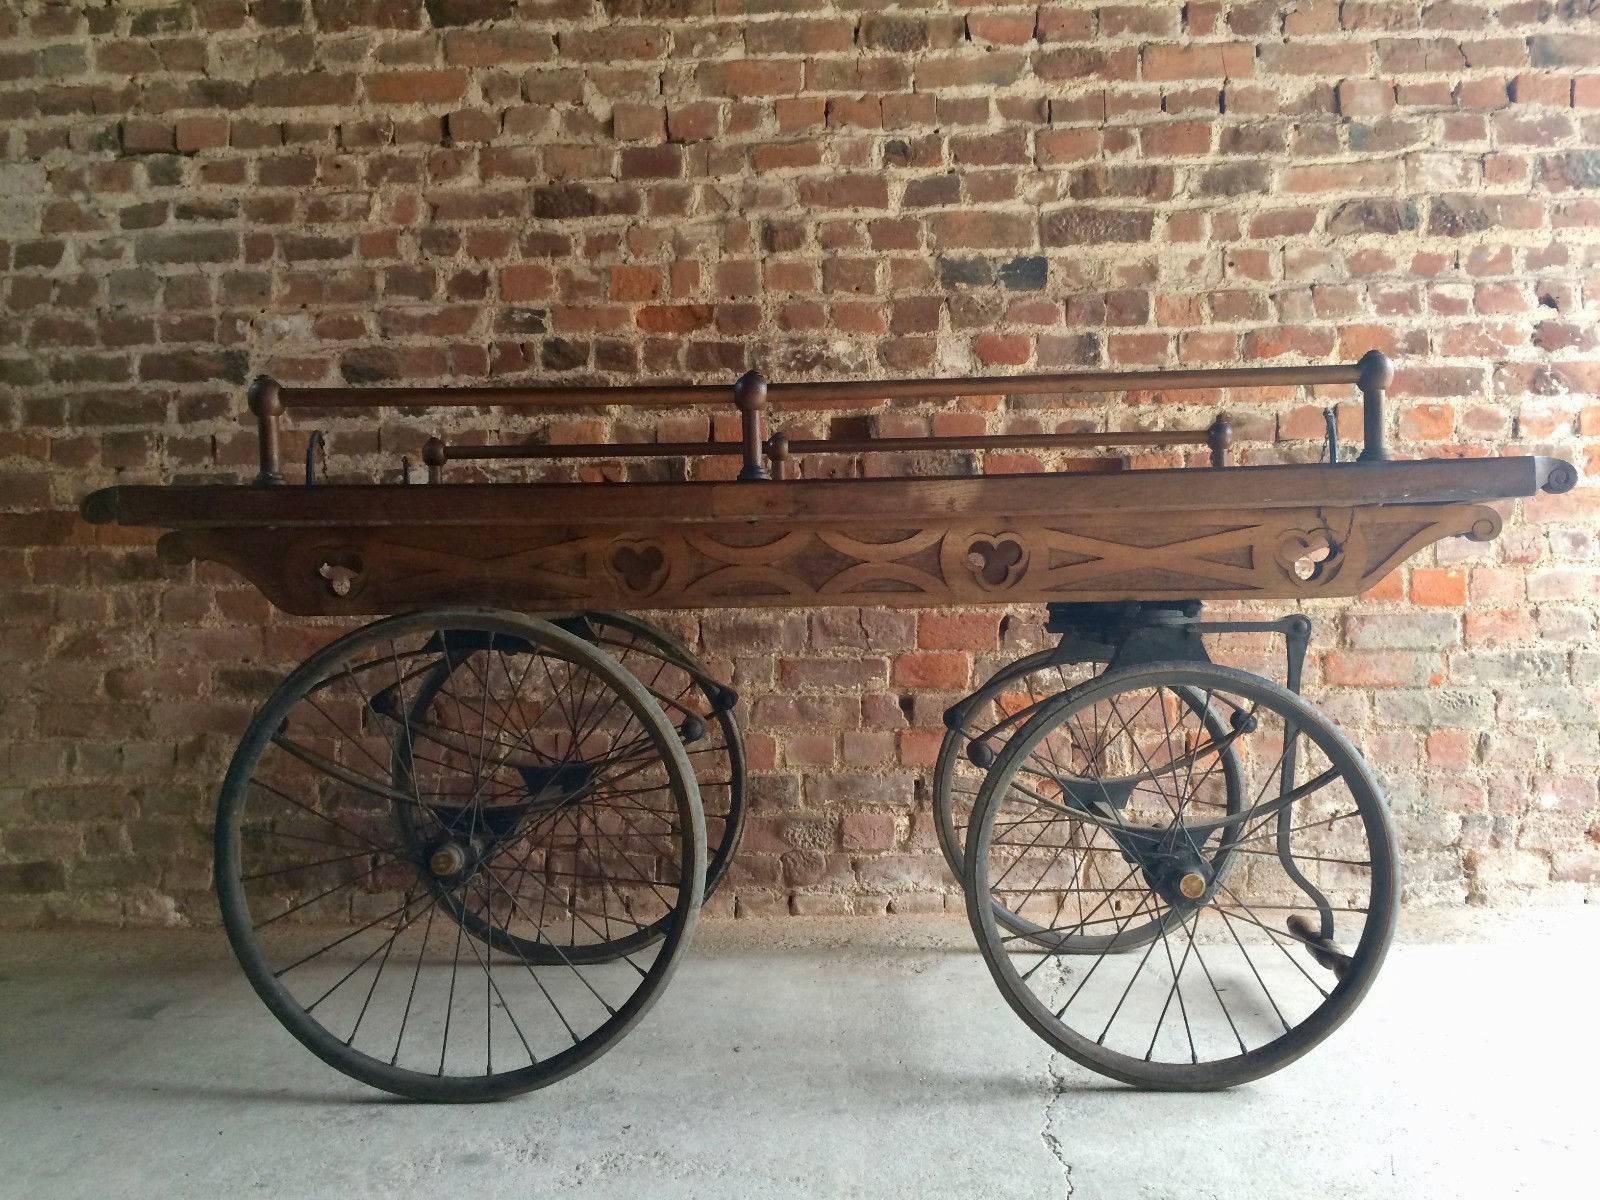 A magnificent Victorian 19th century coach built oak funeral Bier carriage, circa 1870, this casket carriage would have been used to carry the coffins of those that could not afford a luxurious horse drawn carriage for their loved ones, complete in